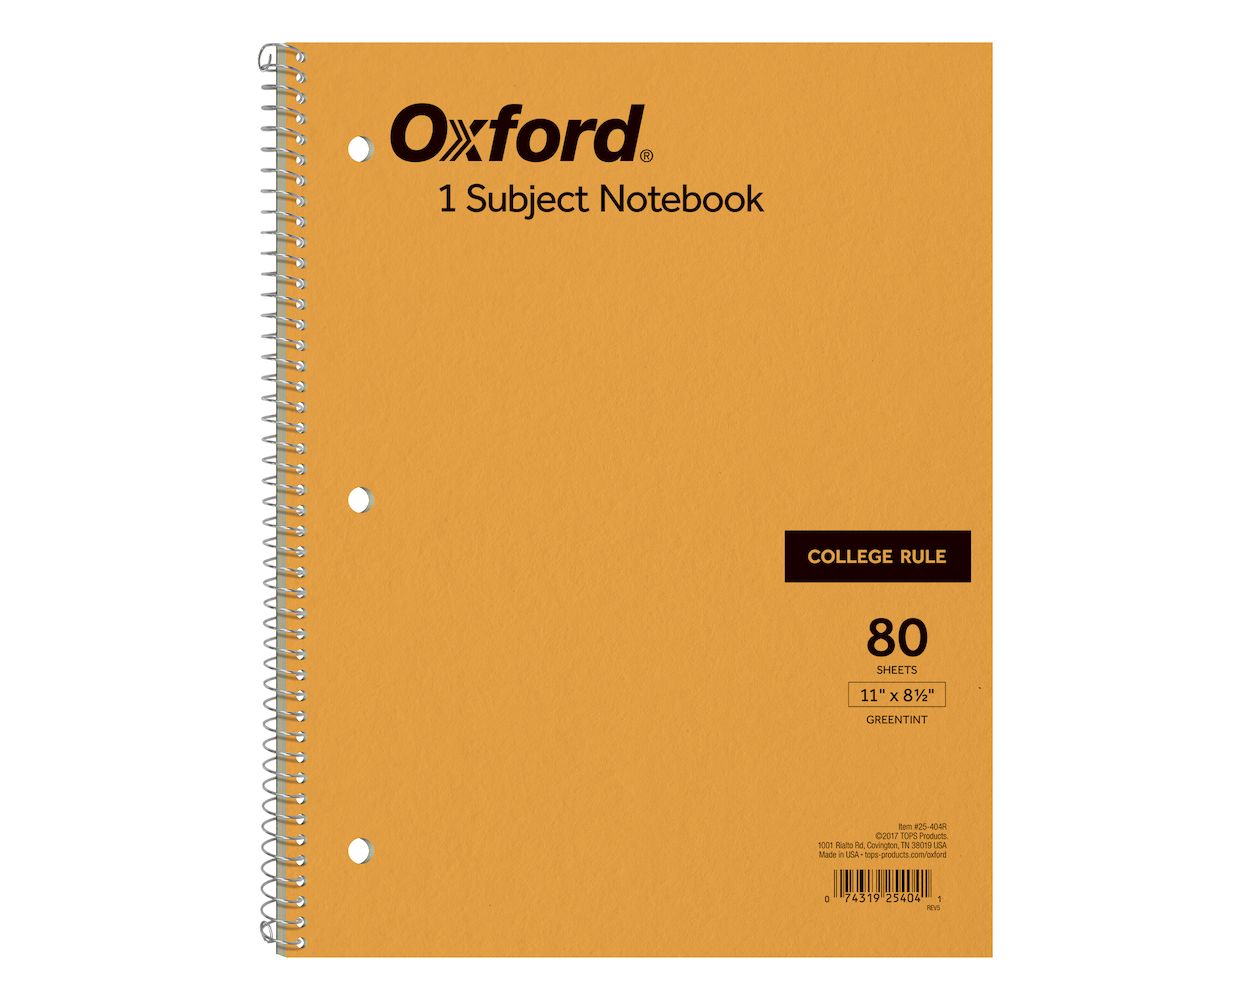 Oxford Stone Paper Notebook, 8-1/2 x 11, Blue Cover, 60 Sheets